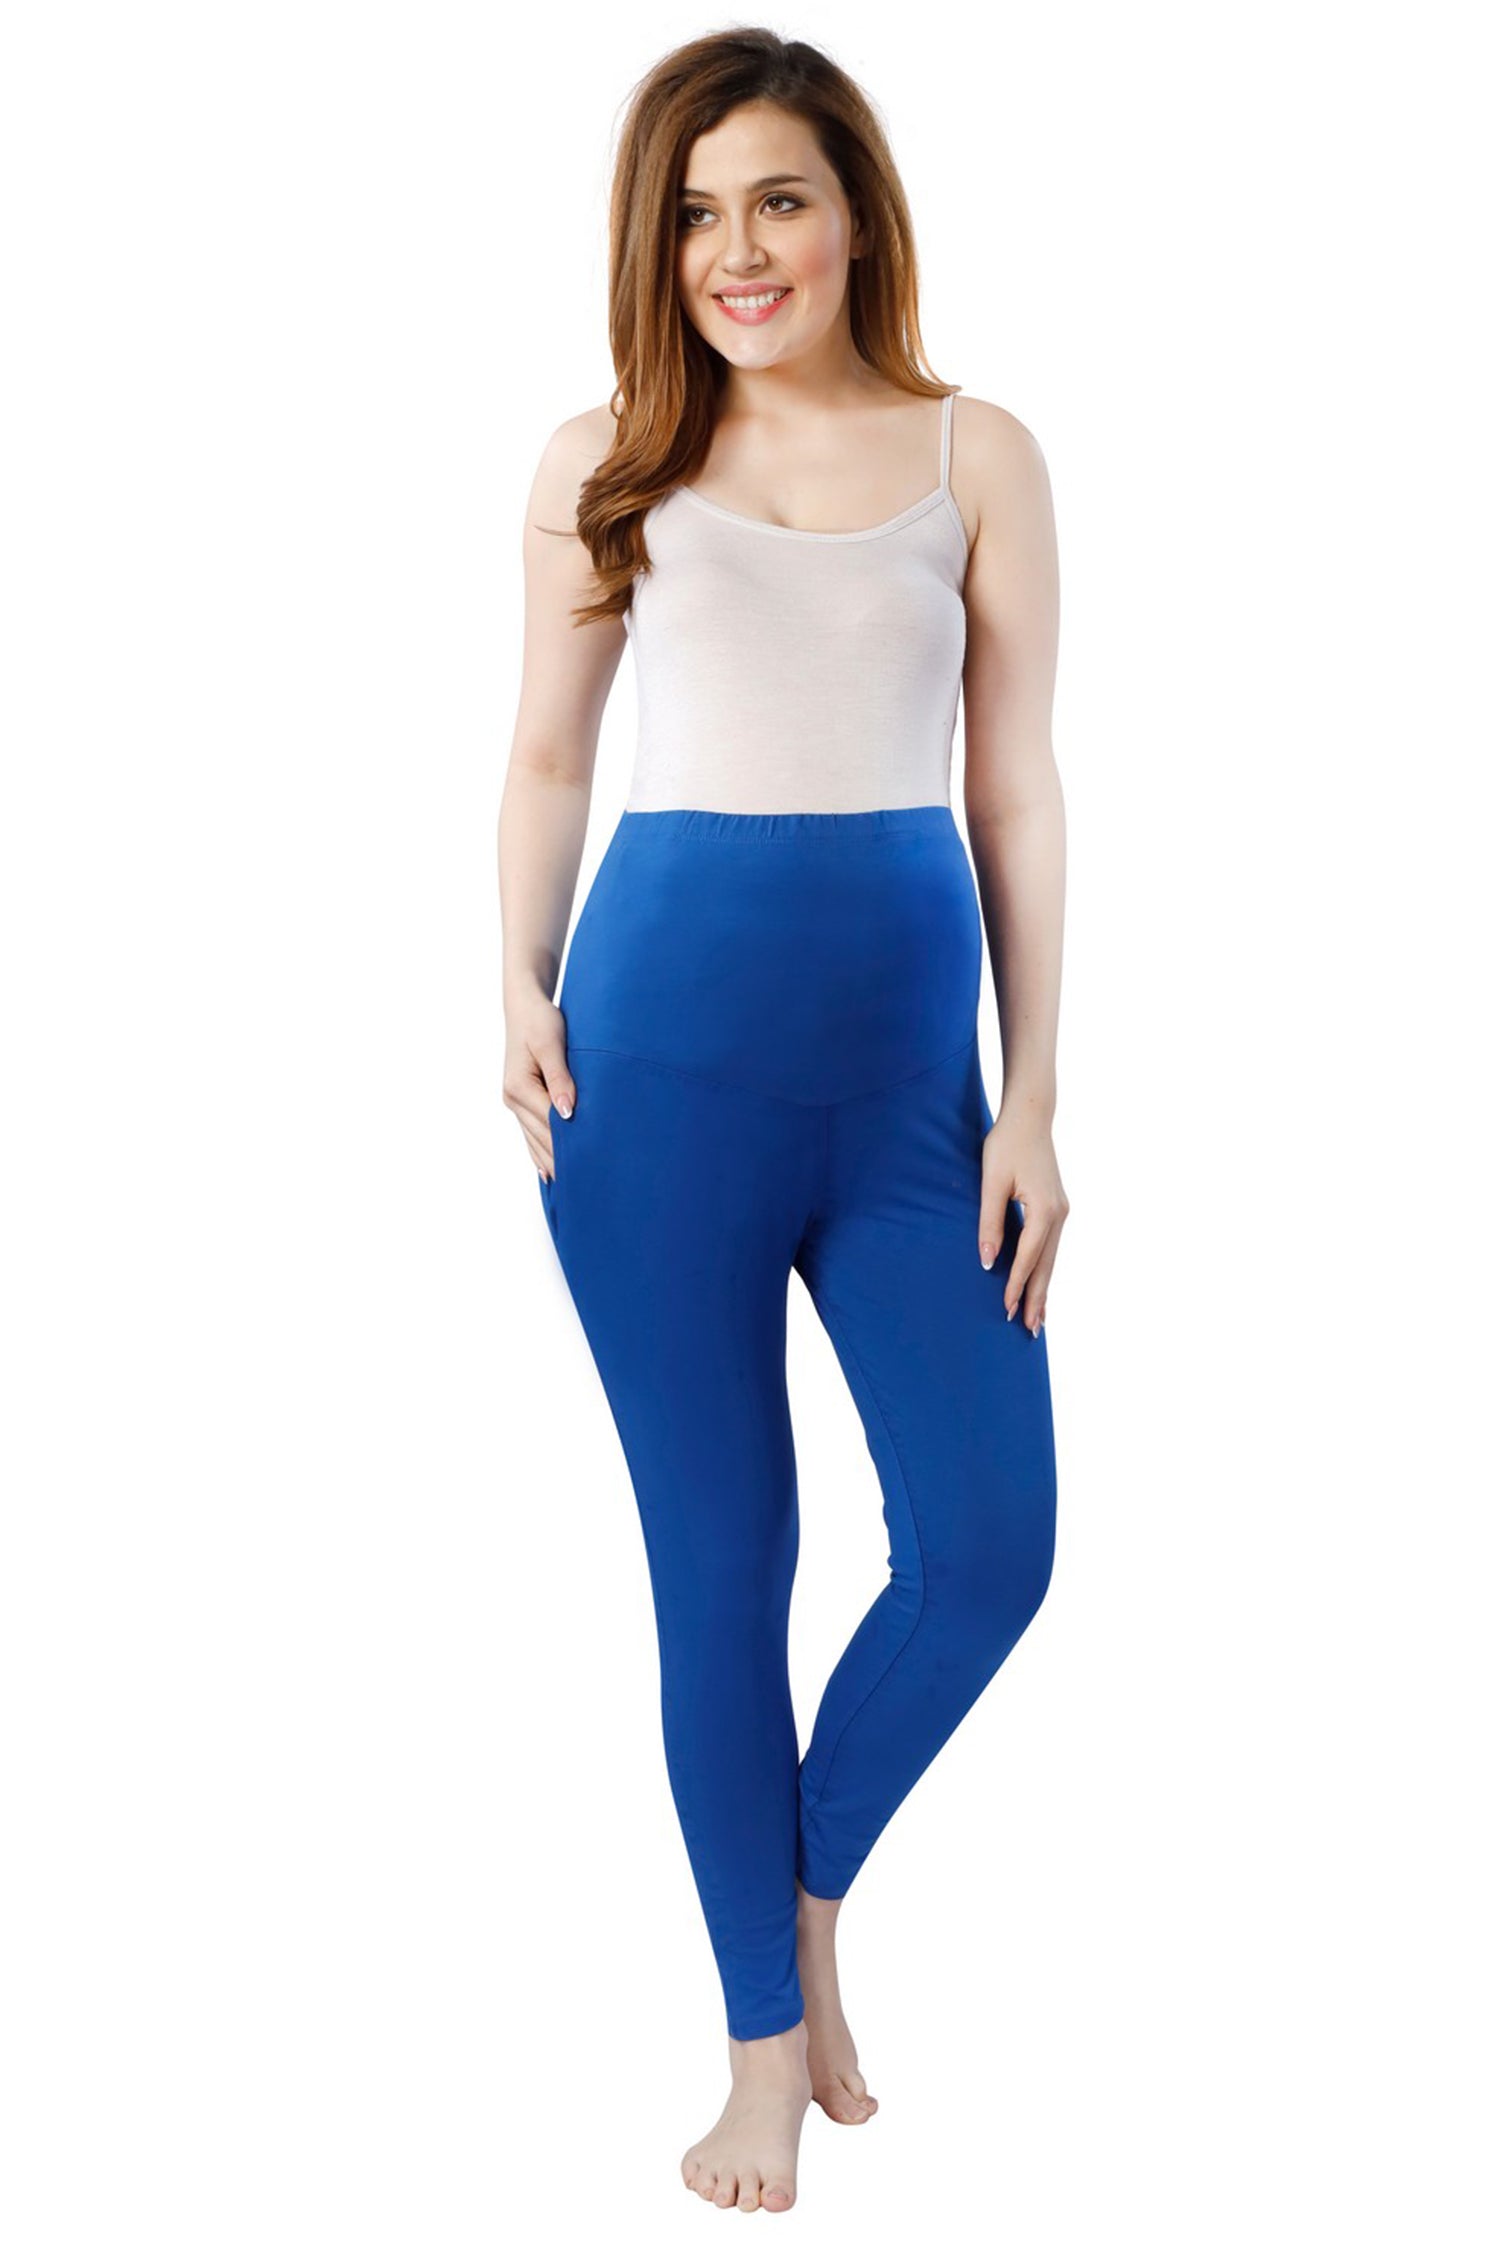 CTHH Maternity Leggings for Women Over The Belly - India